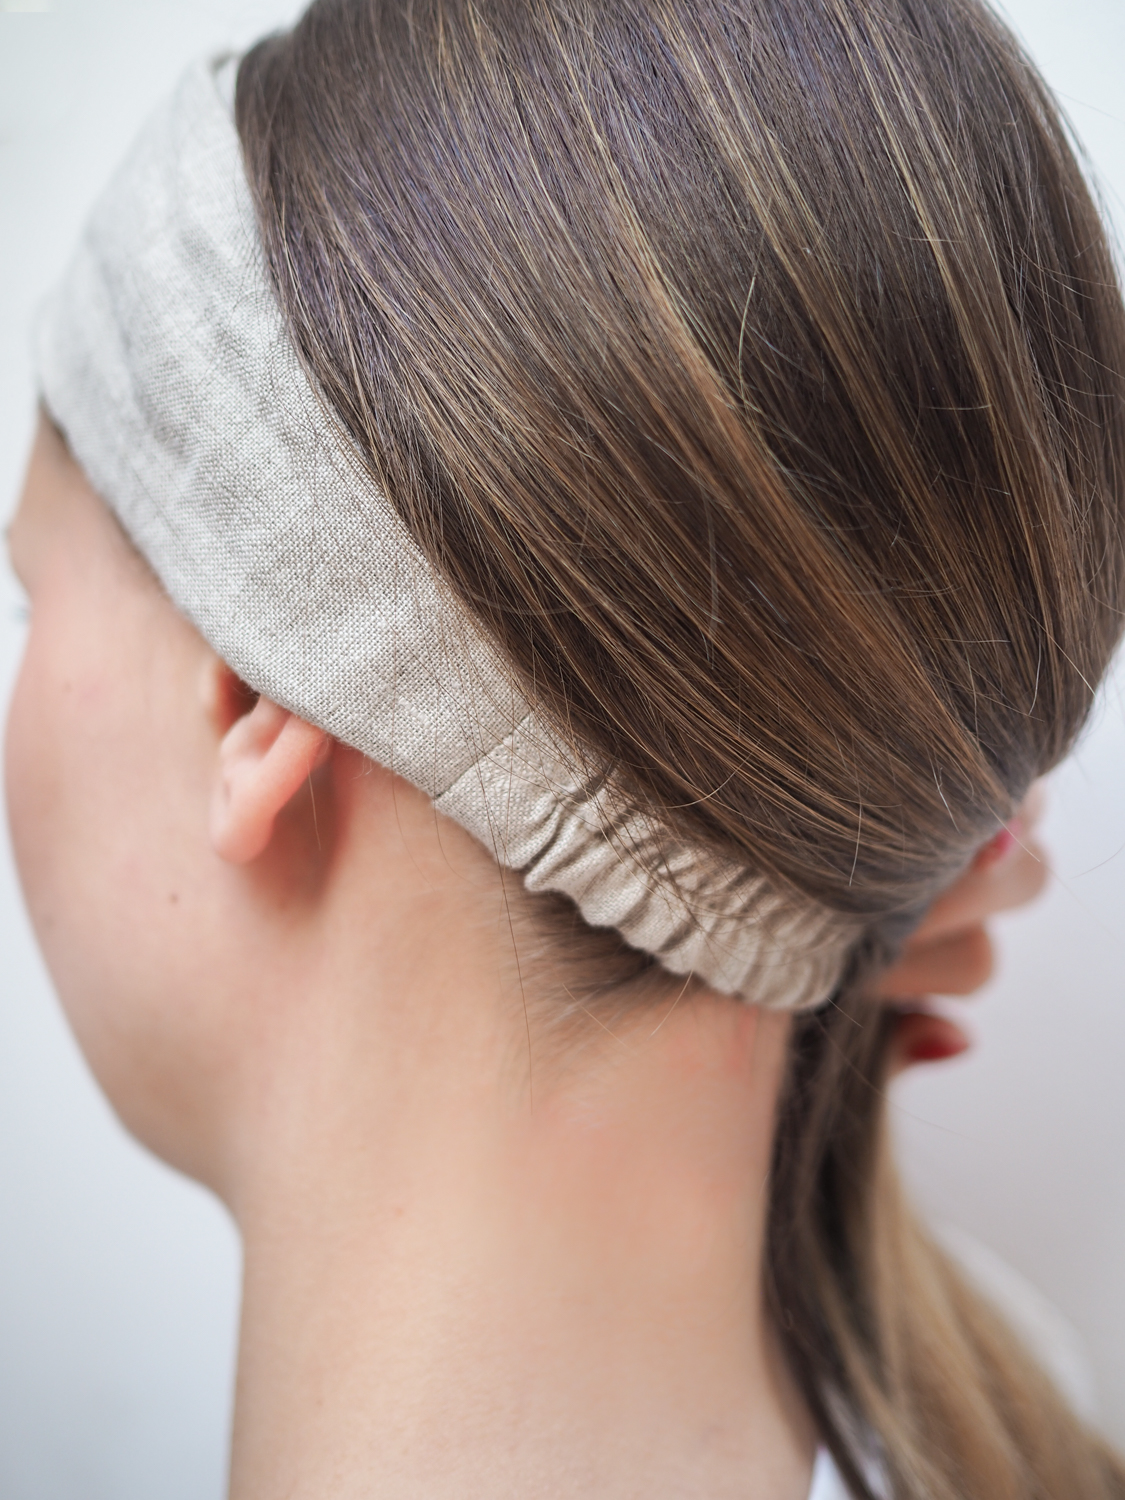 Natural linen perfect for headband outfits! | summer